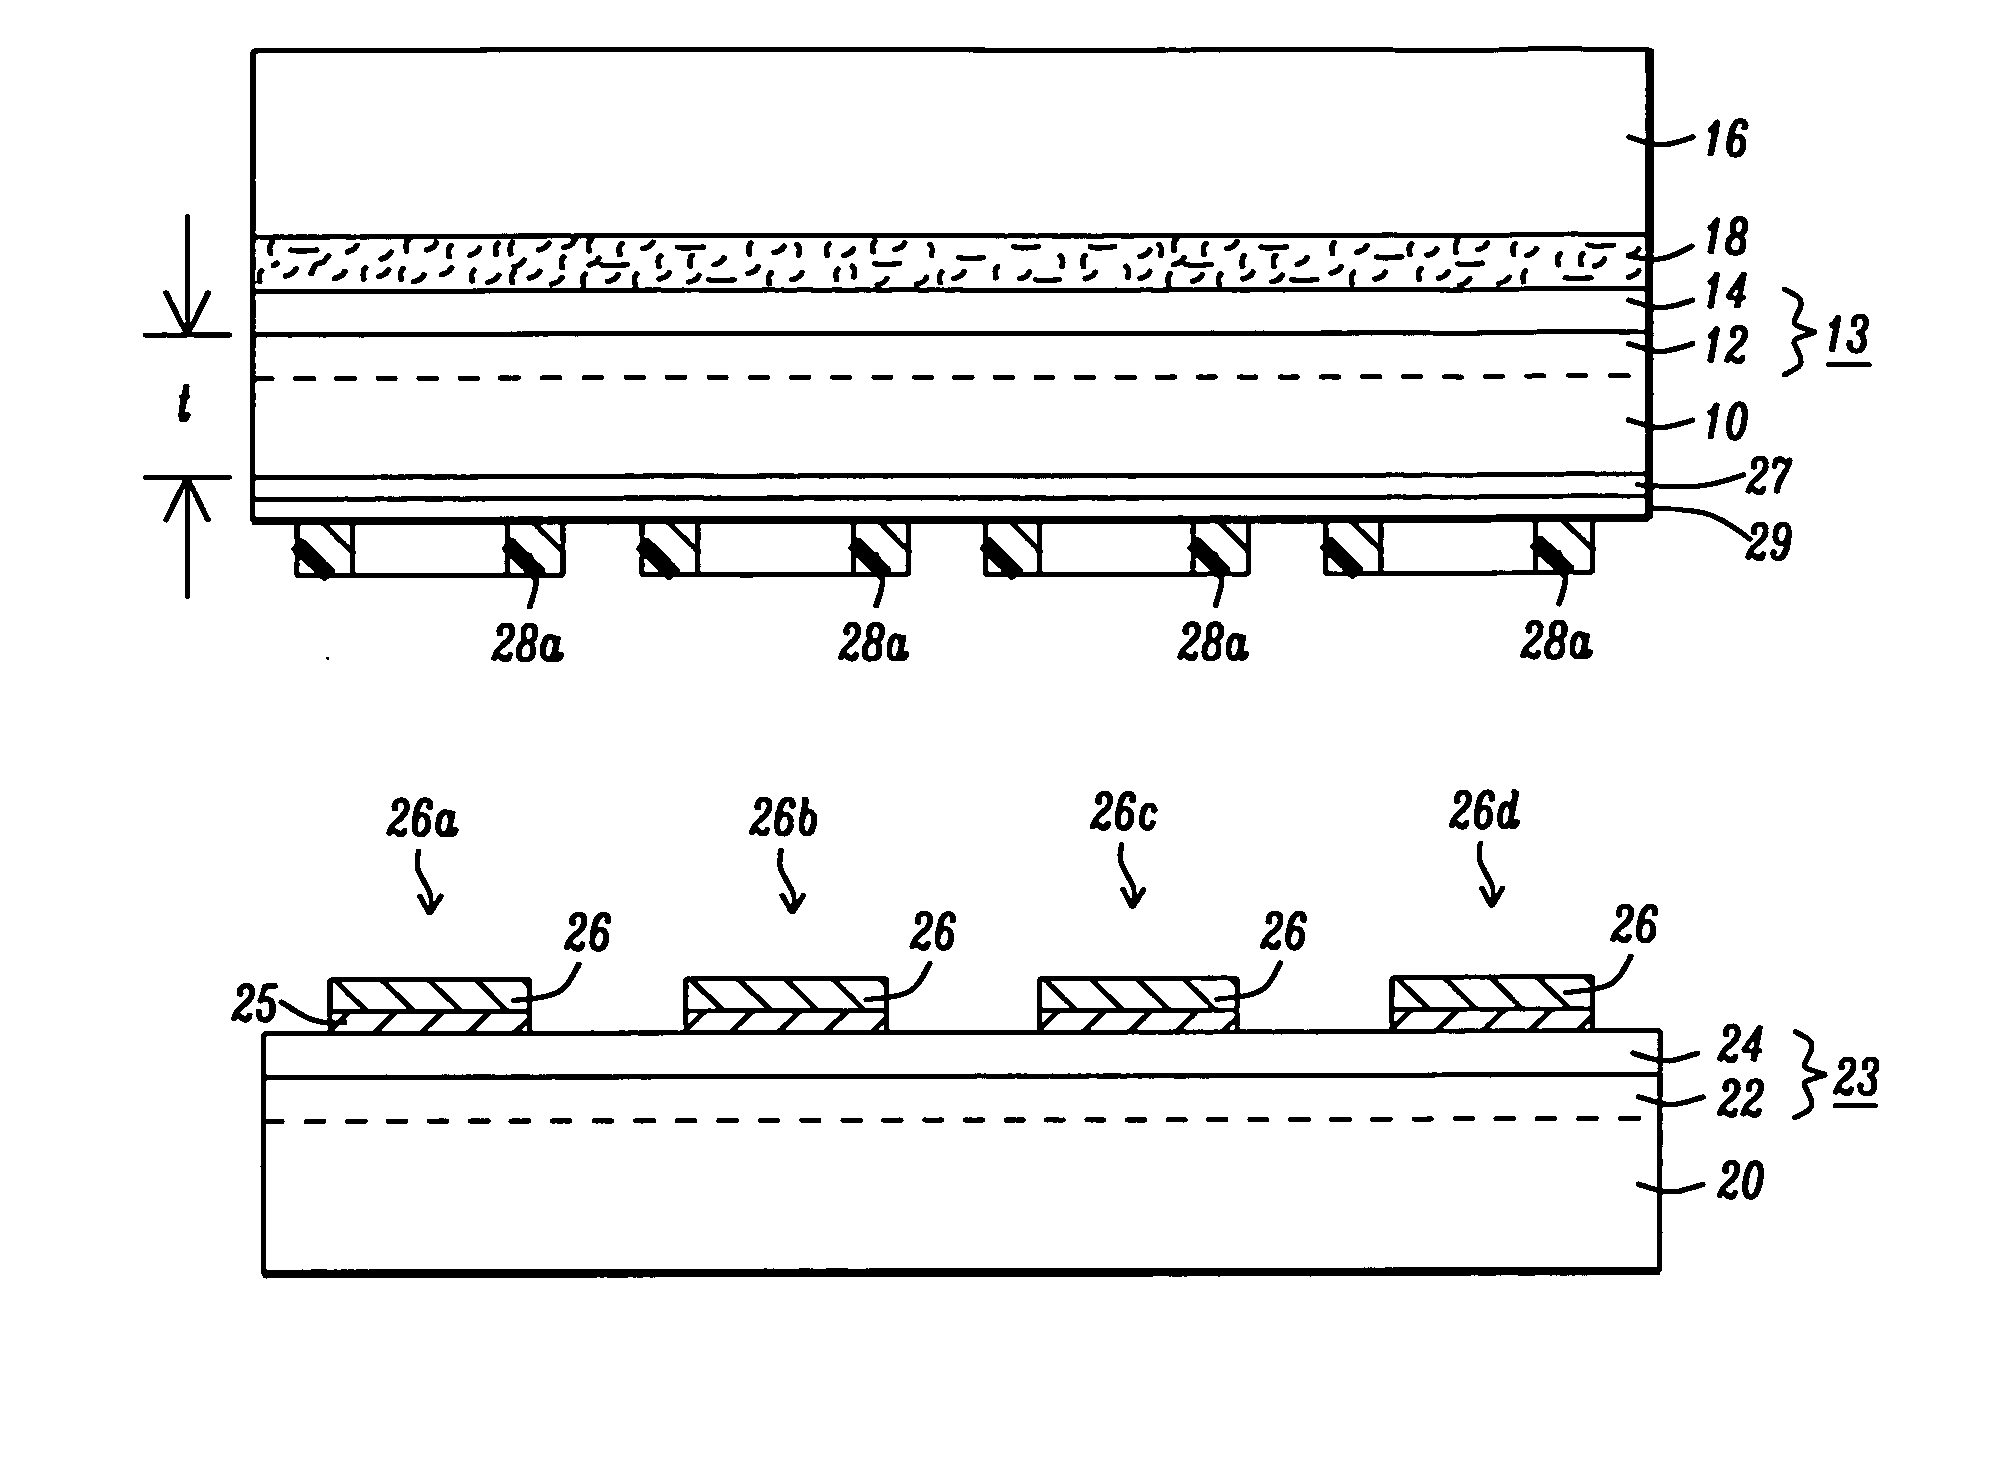 Method of stacking thin substrates by transfer bonding